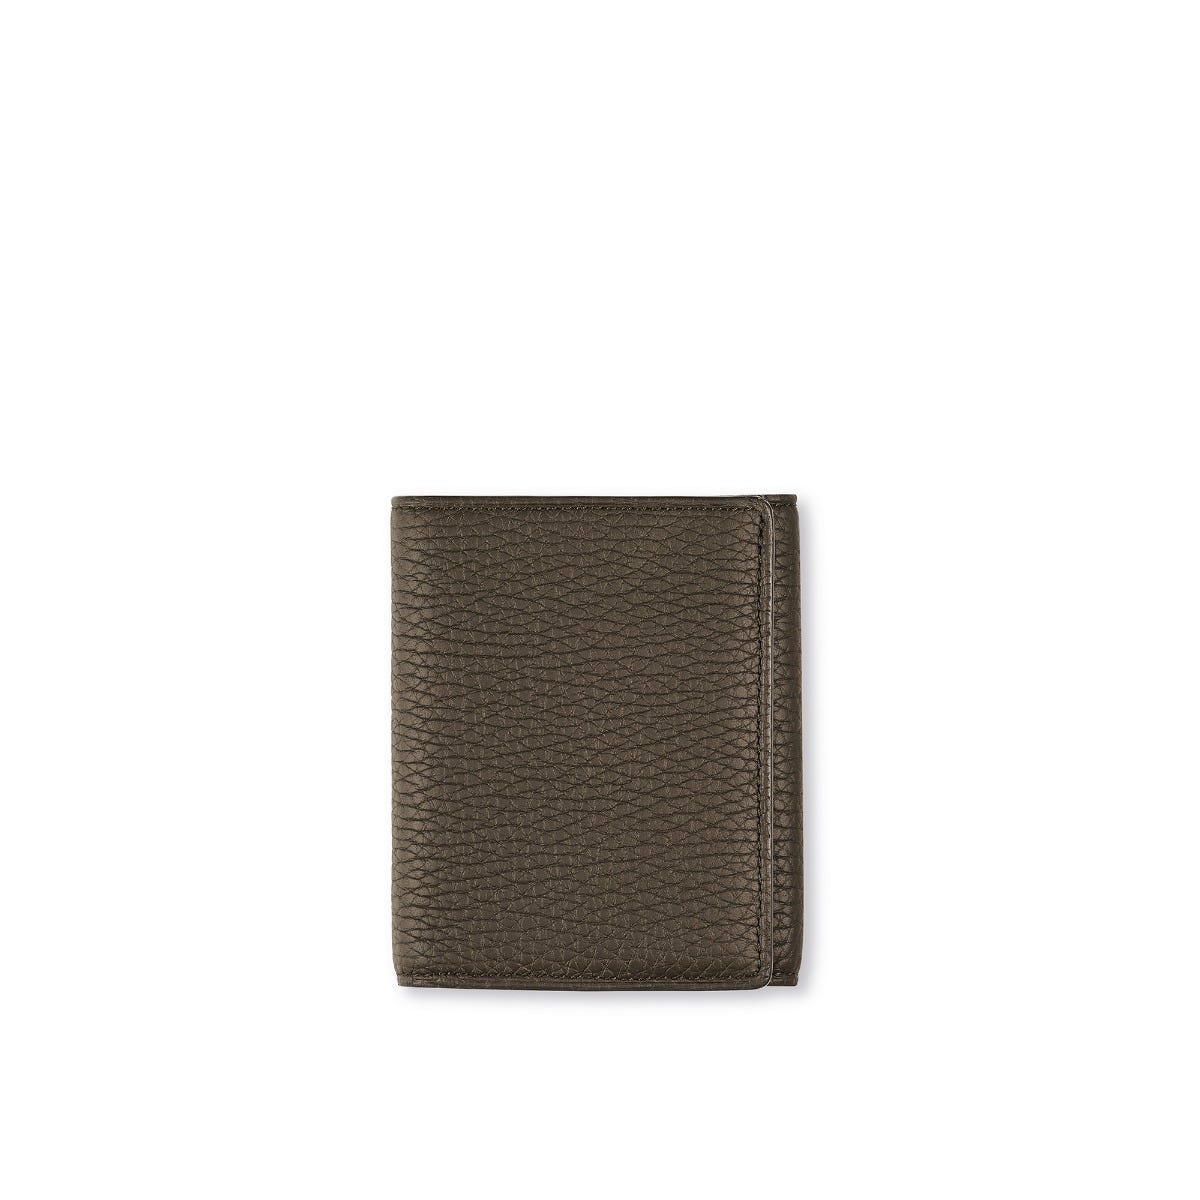 GMT Trifold Wallet in Carbon Soft Grain Leather